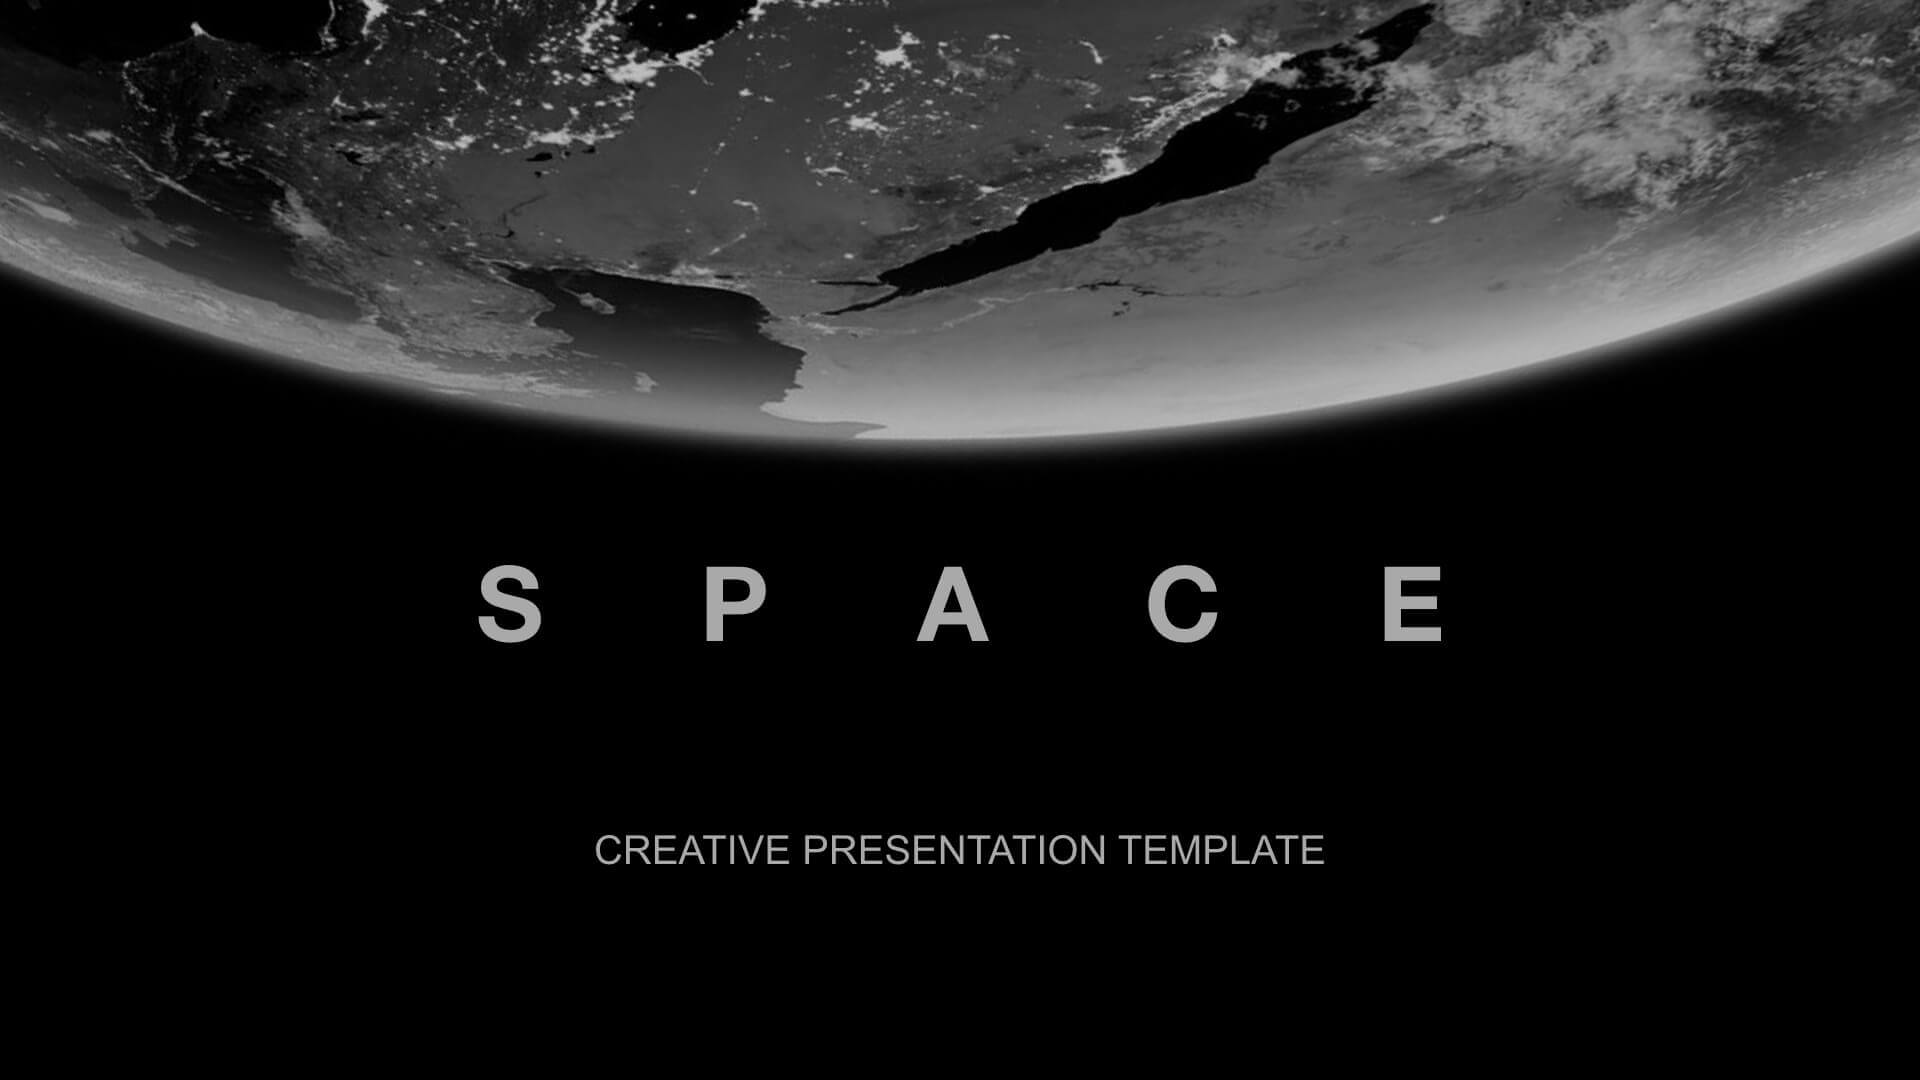 space images for presentation